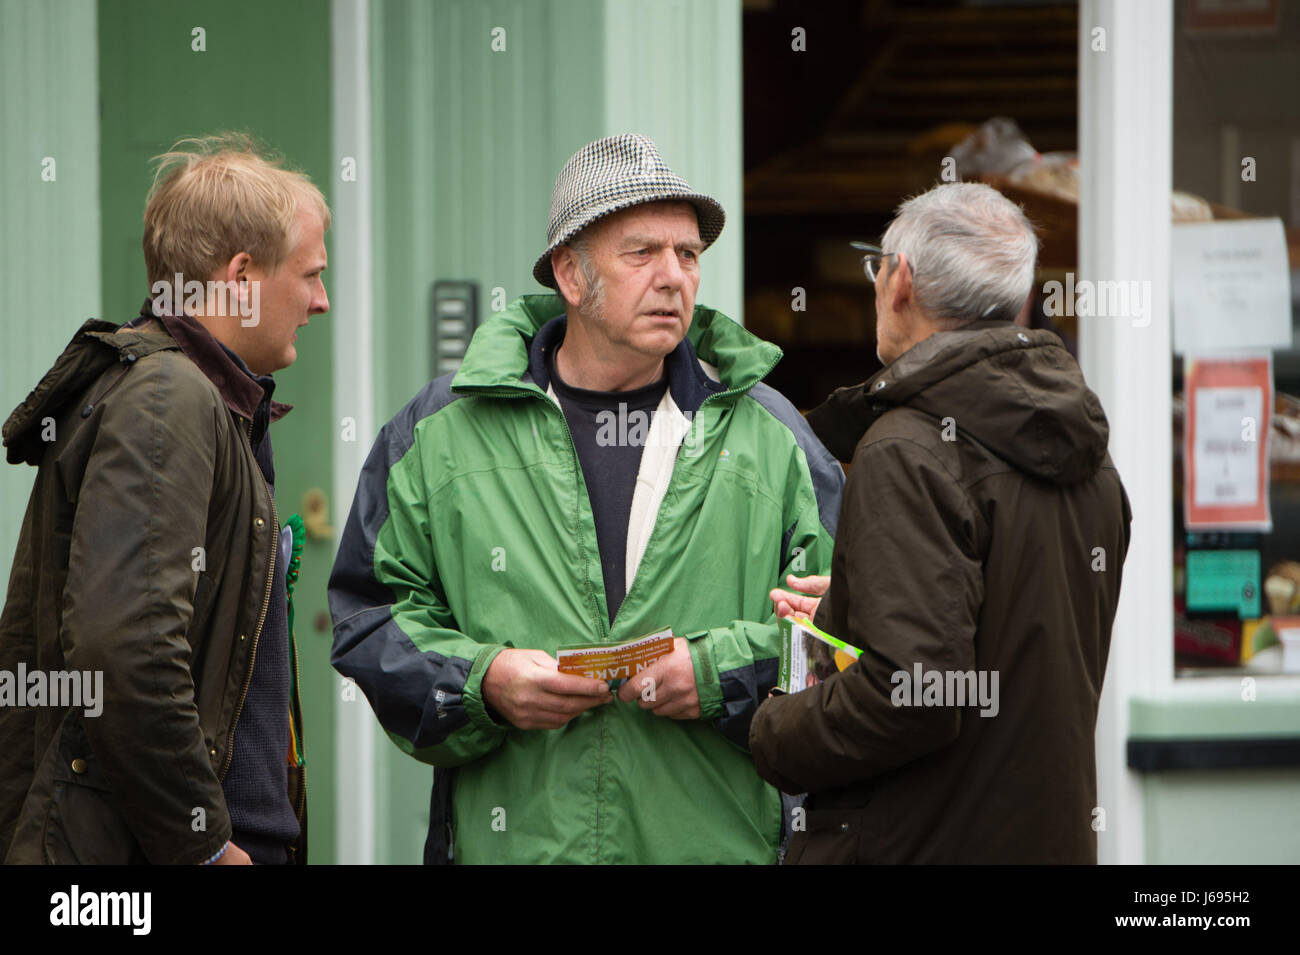 Aberystwyth Wales UK, Saturday 20 May 2017 General Election 2017: Supporters of Plaid Cymru out canvassing for votes in Aberystwyth on Saturday 20 May 2017. The Ceredigion constituency is currently held by Mark Williams of the Lib Dems Photo credit: Credit: keith morris /Alamy Live News Stock Photo